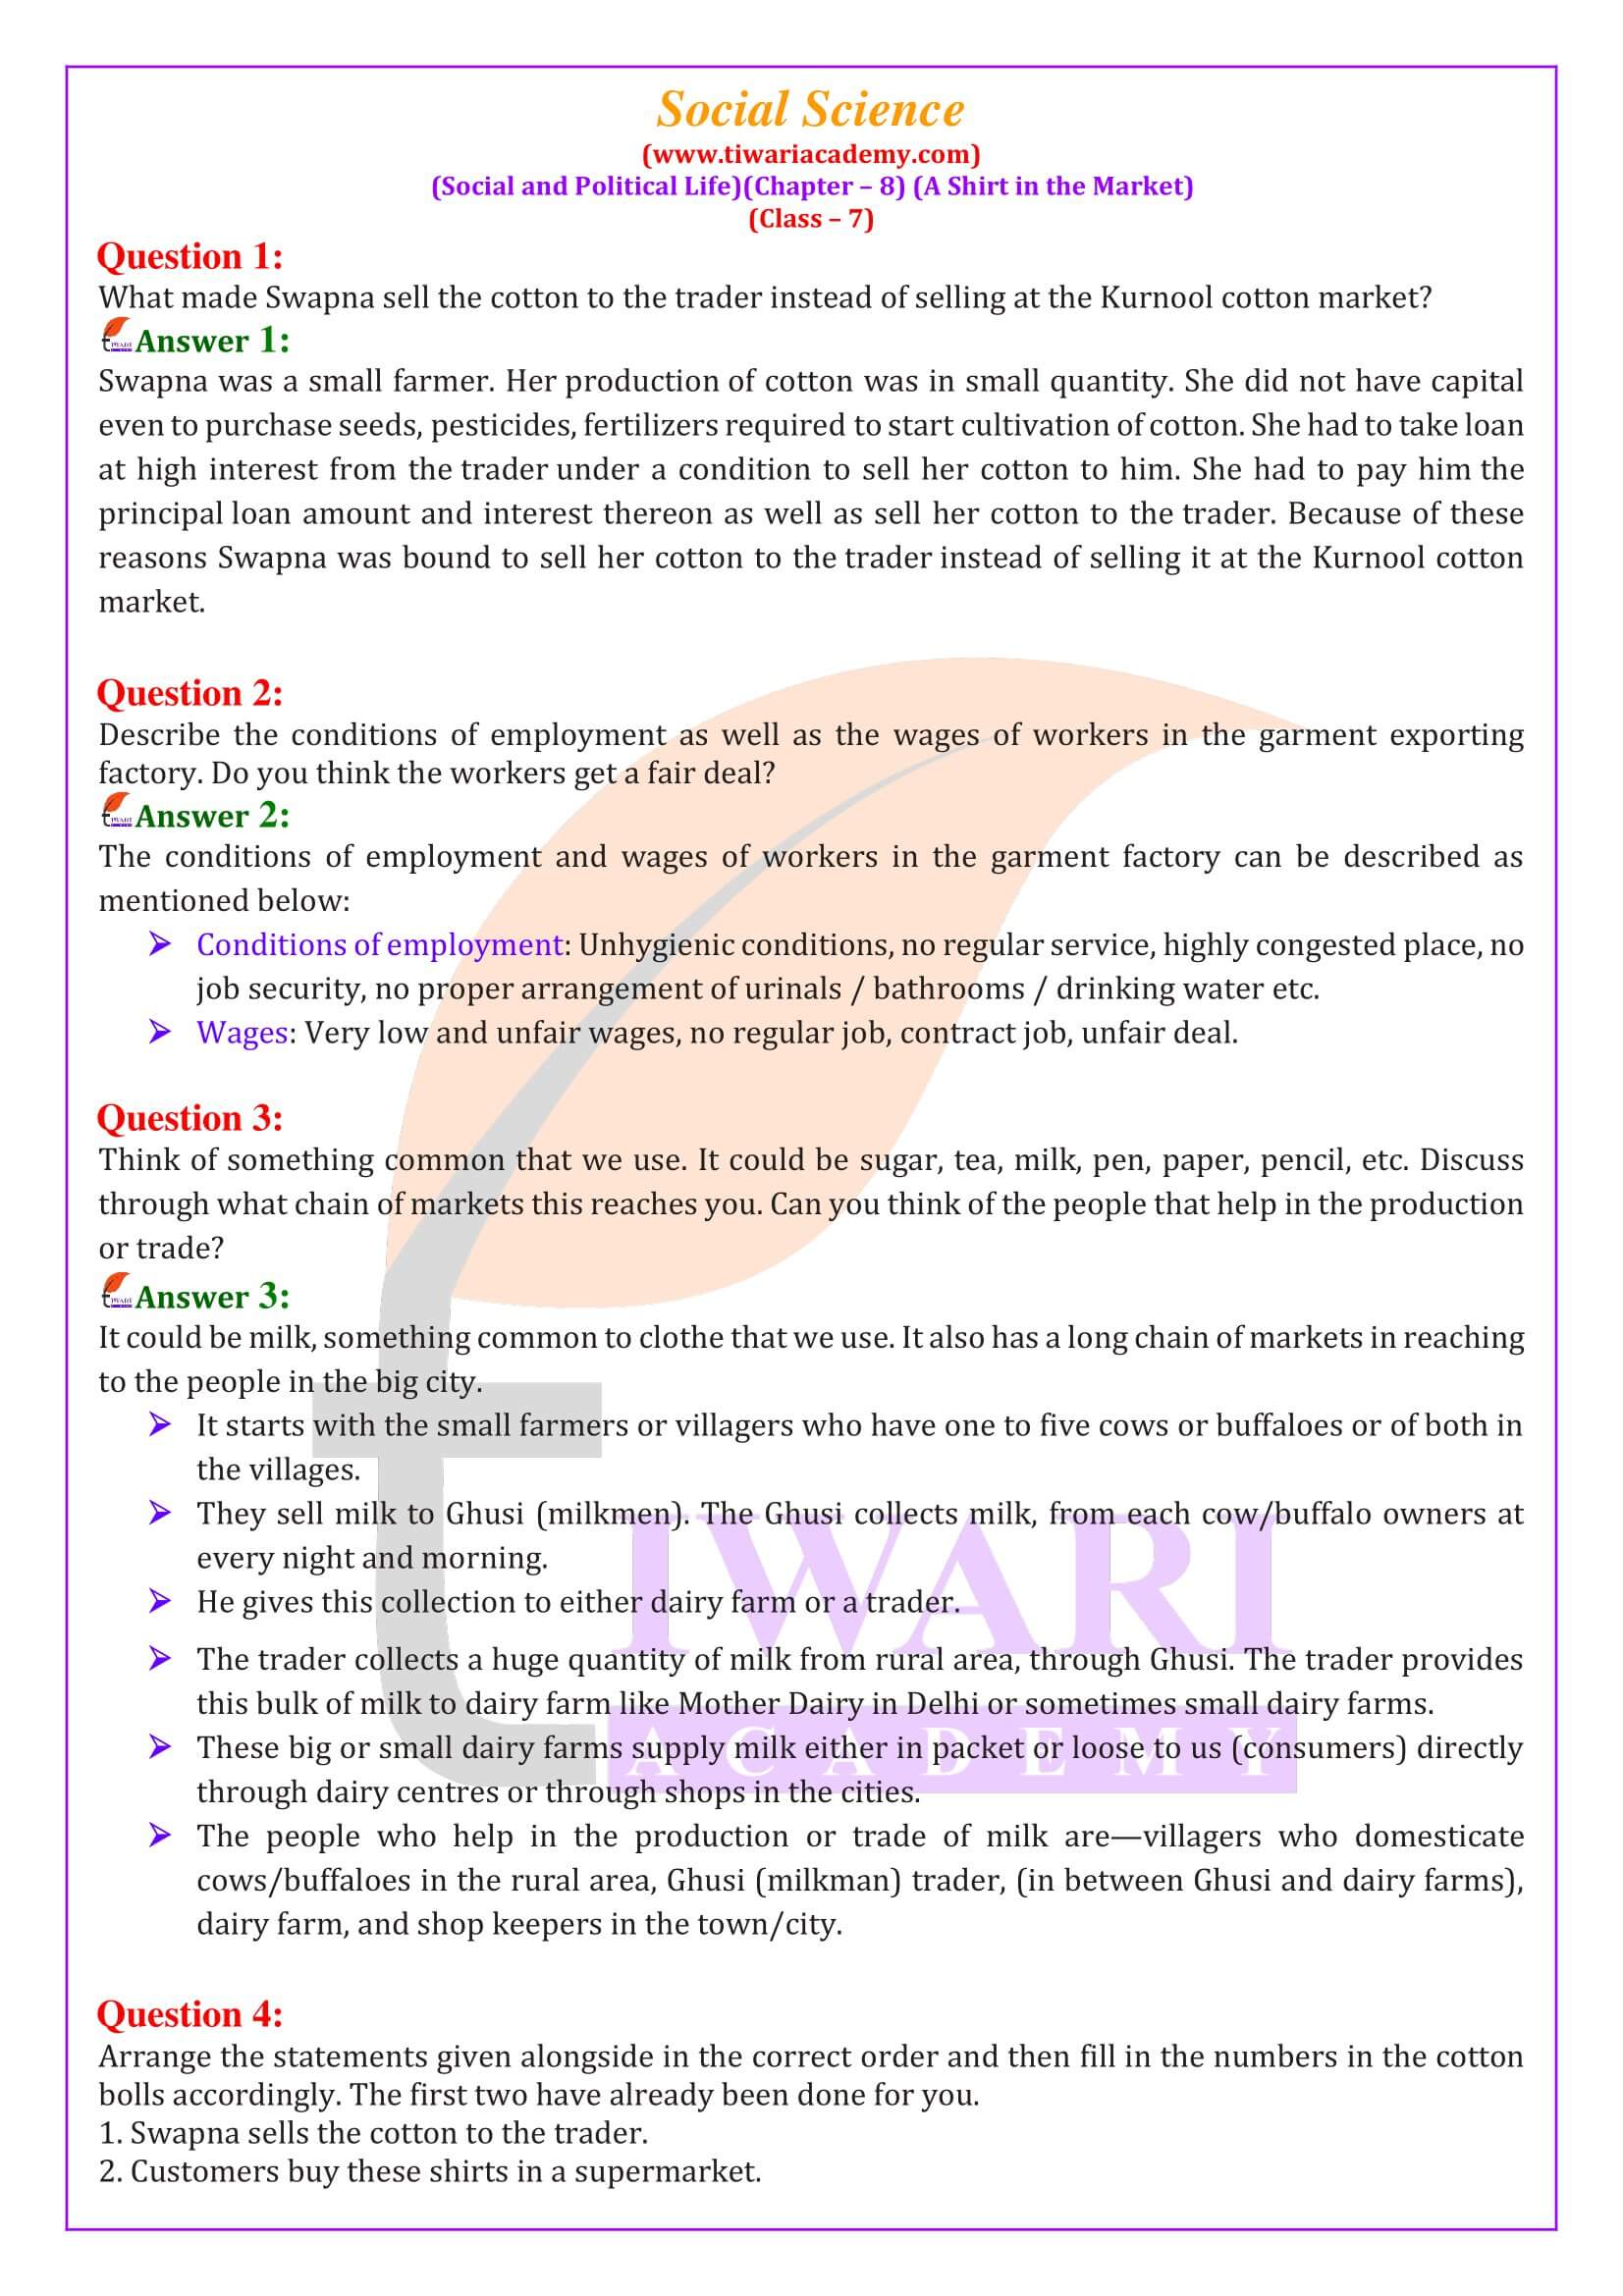 NCERT Solutions for Class 7 Social Science Civics Chapter 8